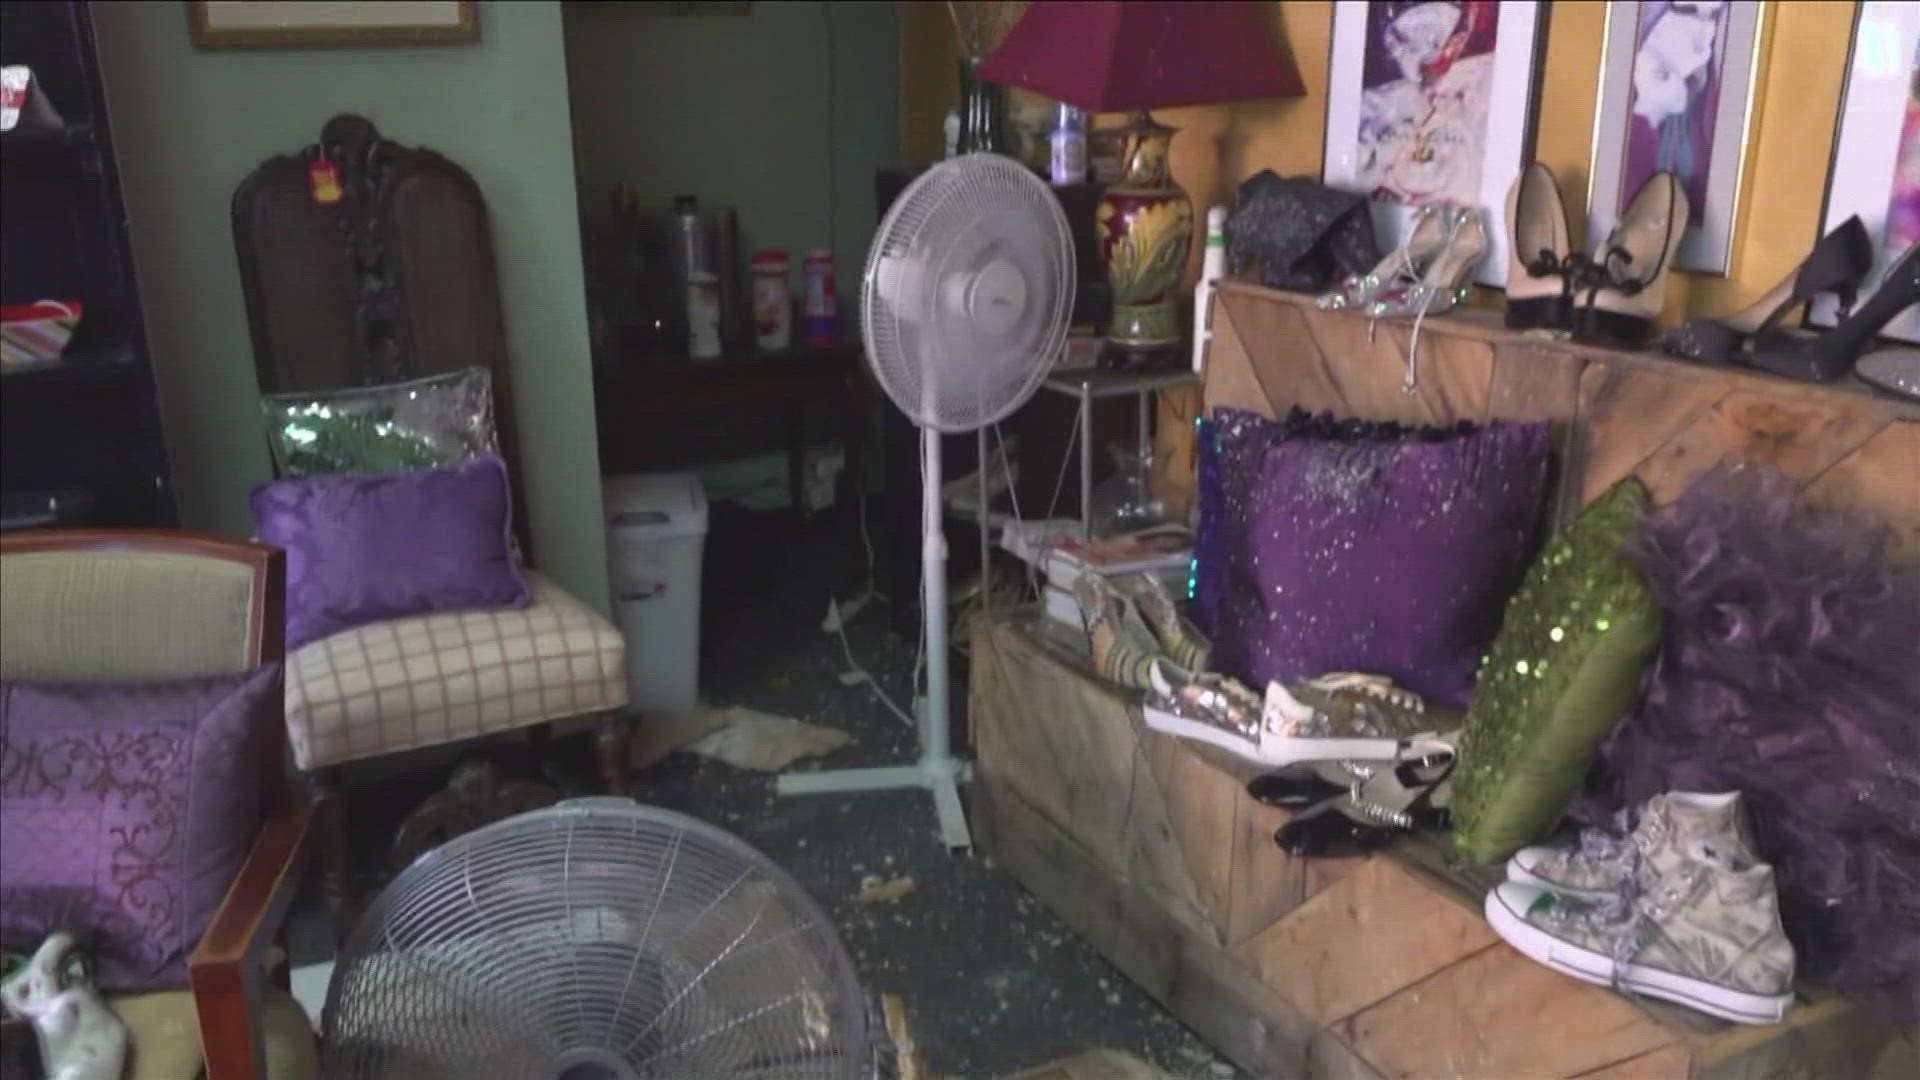 ABC24’s Brittani Moncrease spoke with the owner of The Bazaar who has been struggling to get back on track.